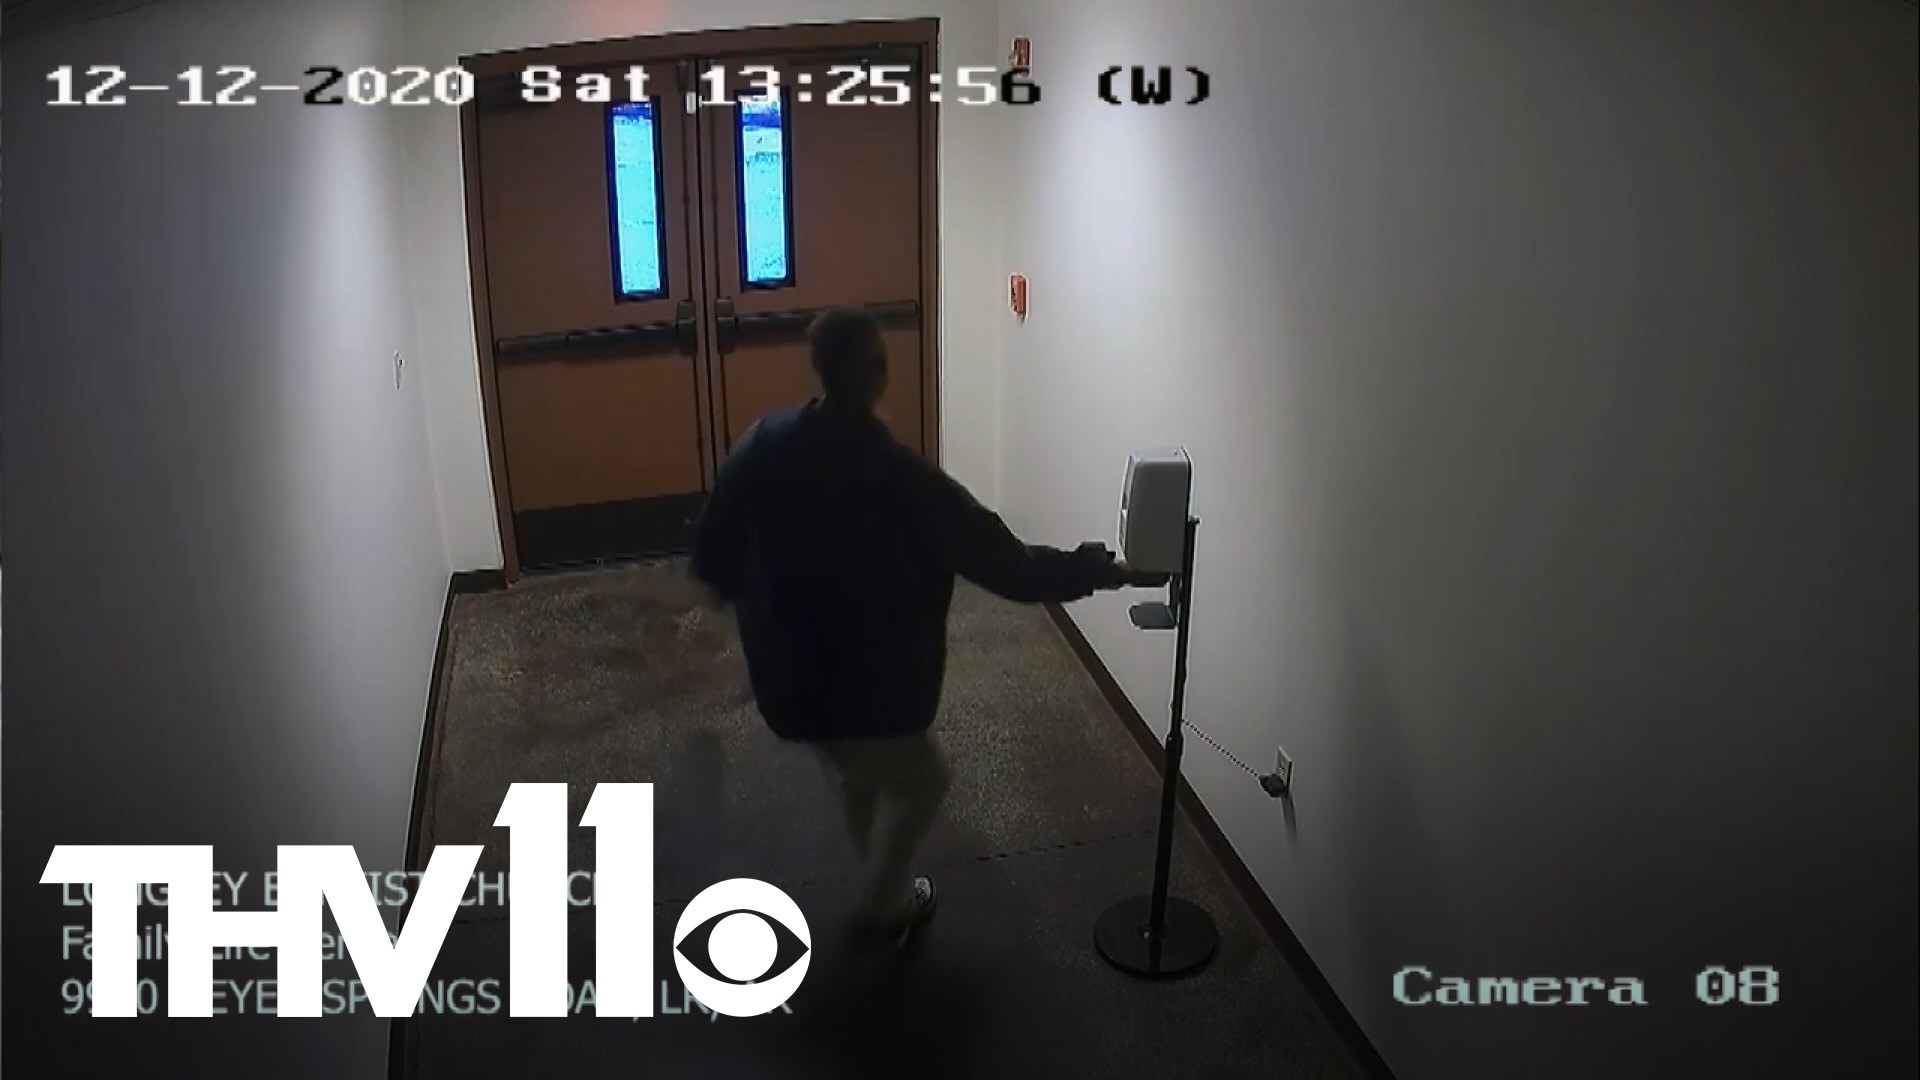 An intruder made sure to sanitize his hands after breaking into a local church and getting spooked by the security system.